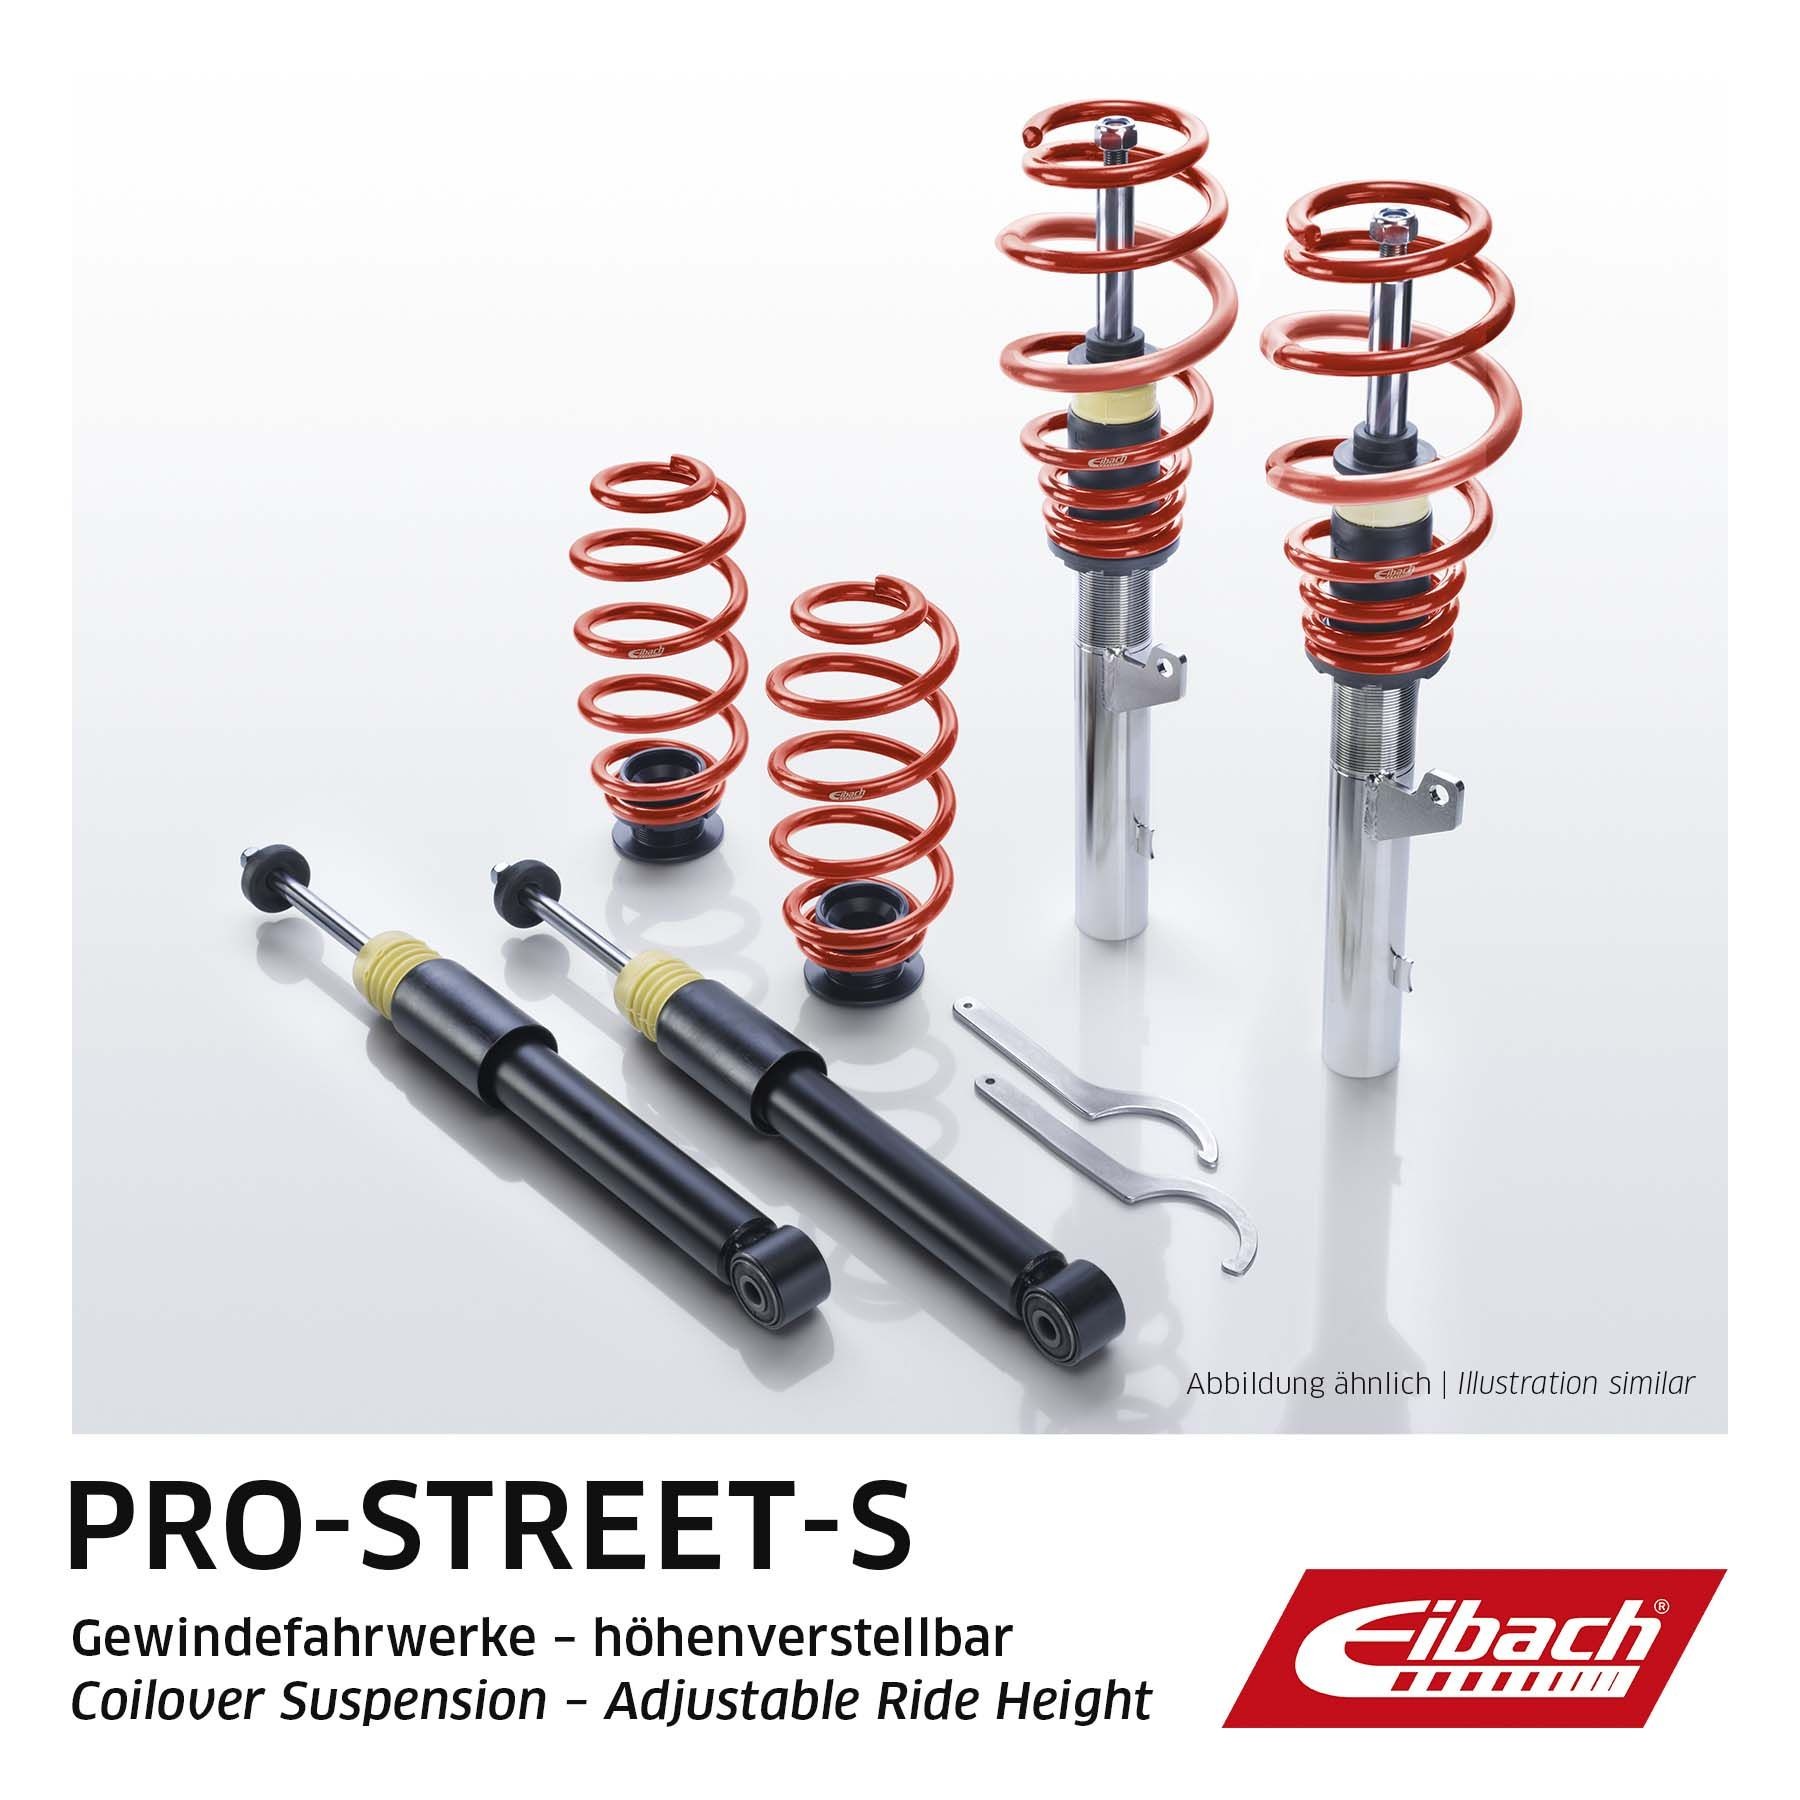 65200110122 EIBACH Pro-Street-S PSS65200110122 Suspension kit, coil springs / shock absorbers BMW E60 530d 3.0 211 hp Diesel 2006 price